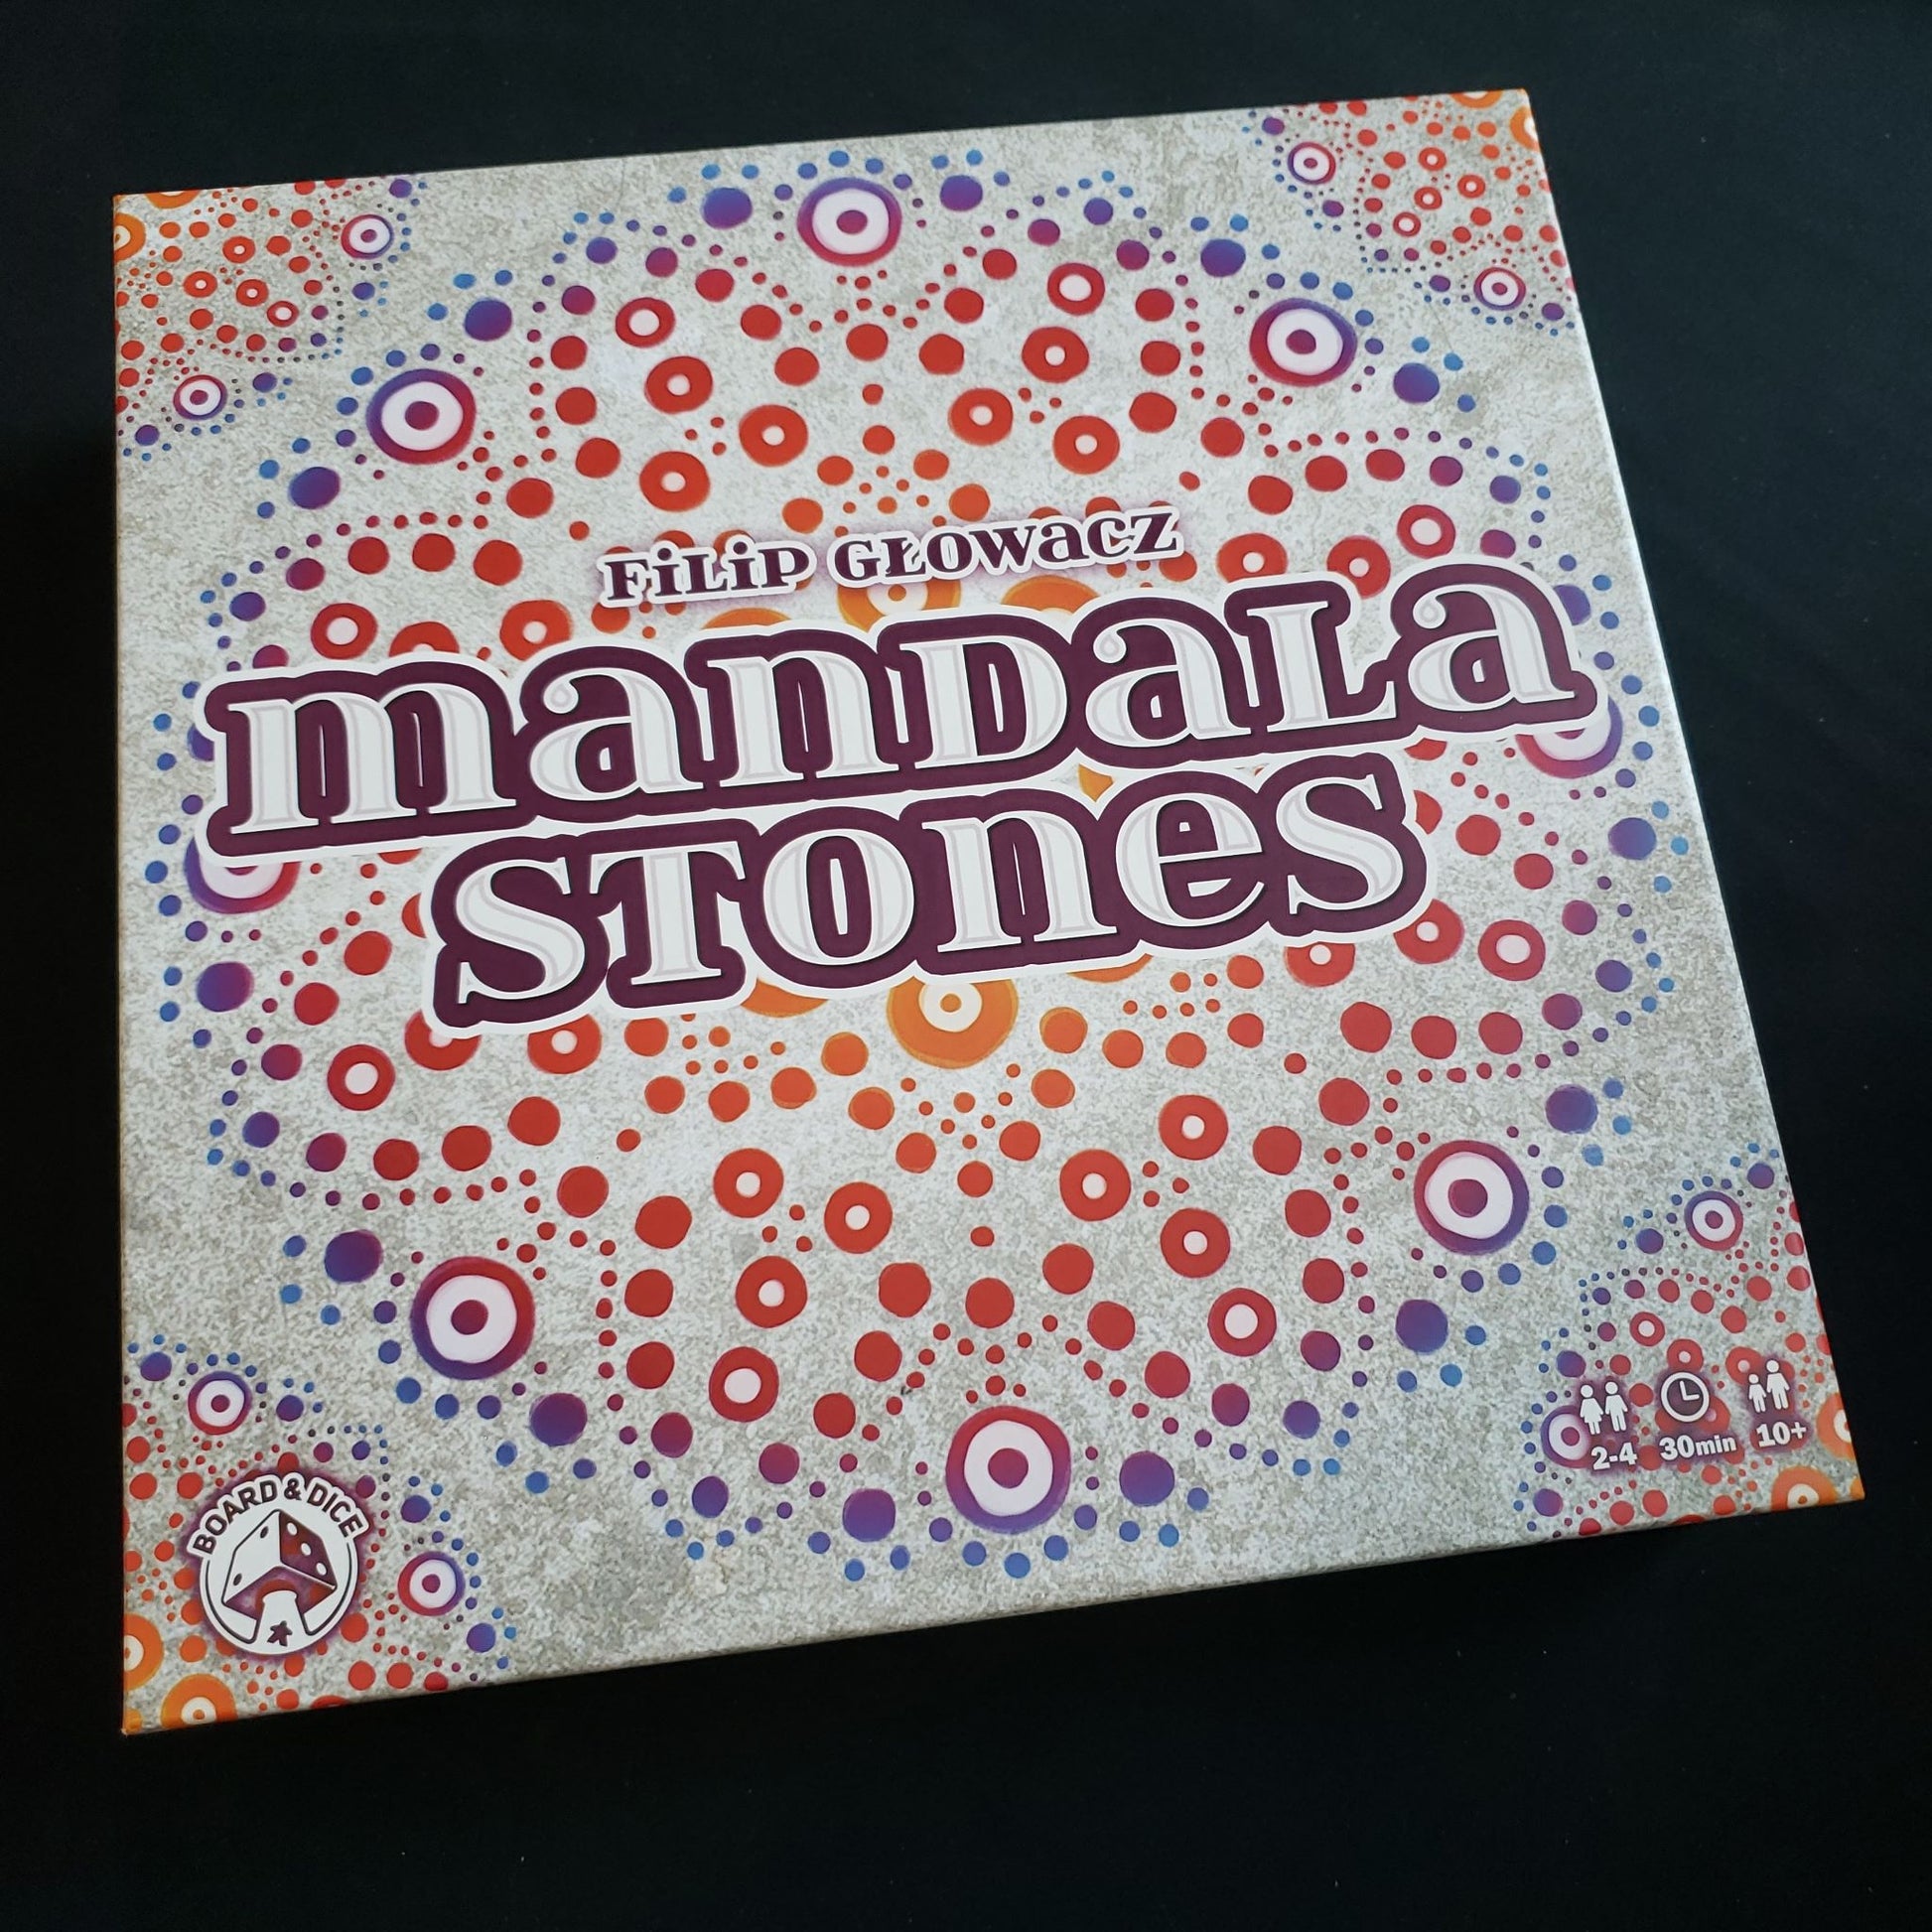 Image shows the front cover of the box of the Mandala Stones board game